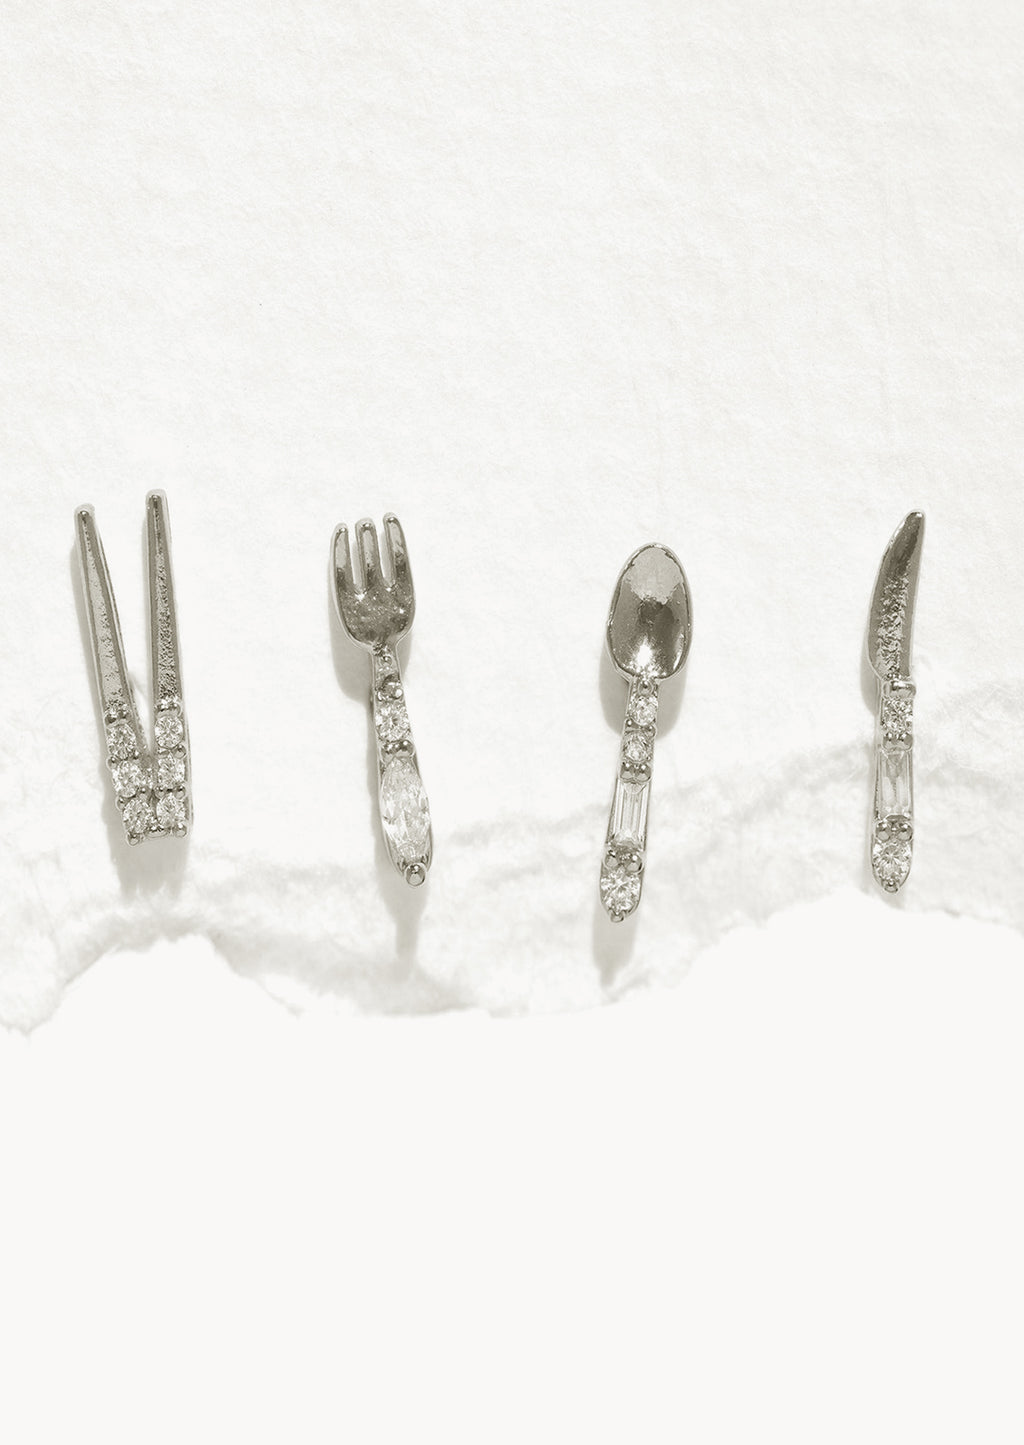 Silver: A set of four silver stud earrings in shape of chopsticks, fork, spoon, and knife.